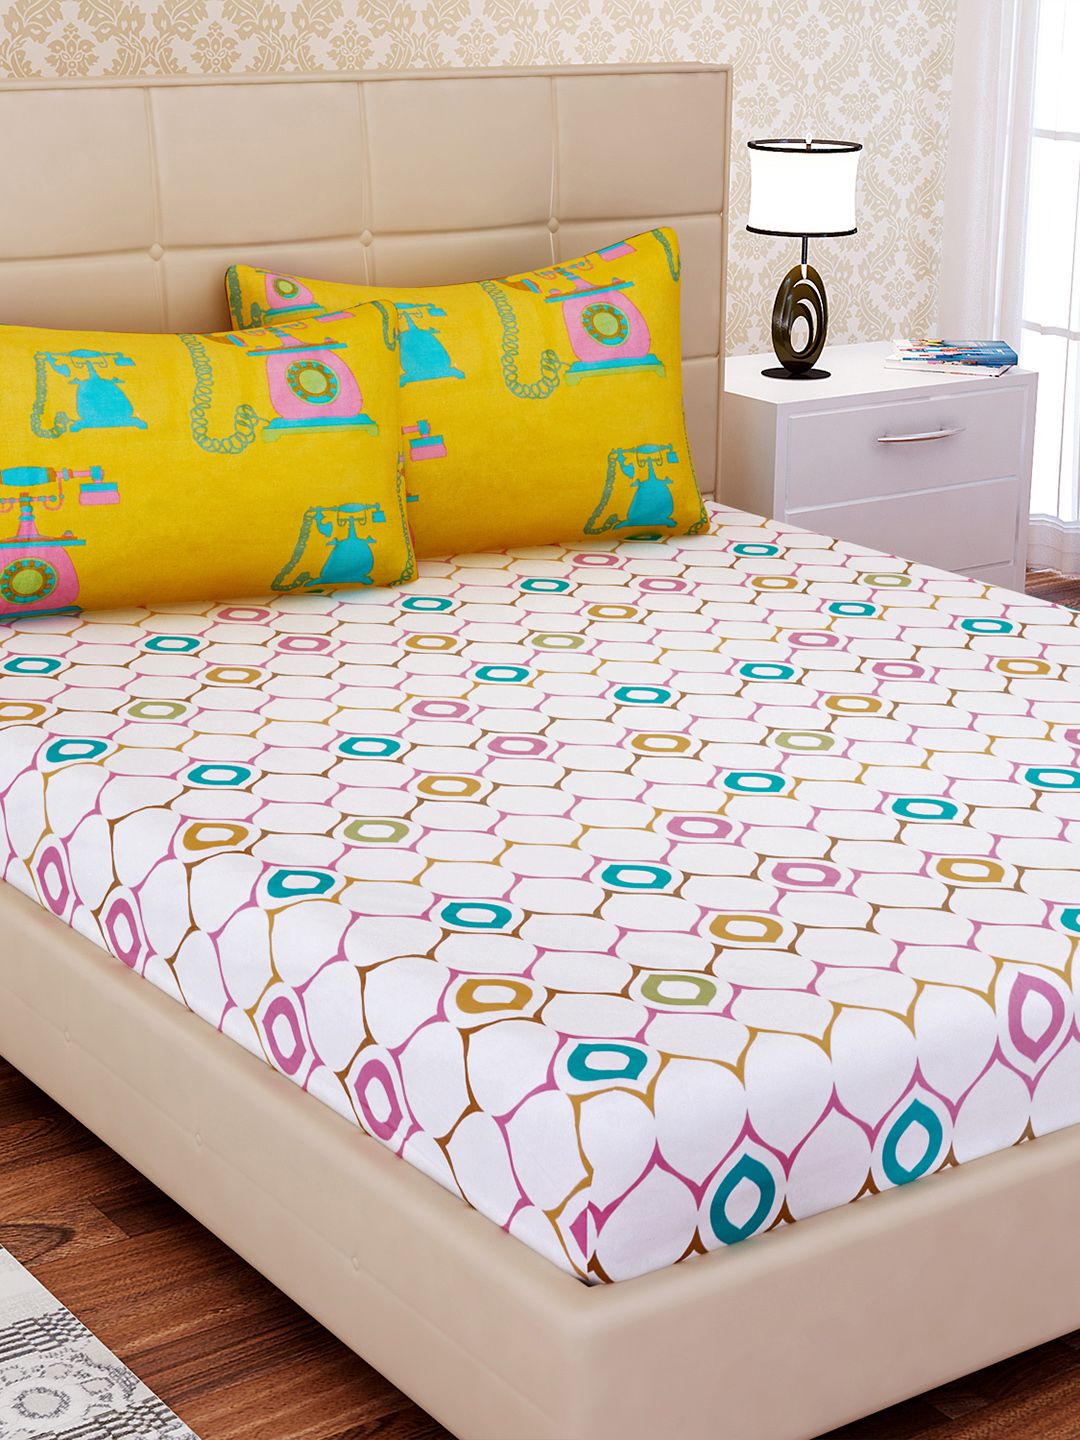 SEJ by Nisha Gupta White & Pink Geometric 144 TC Cotton 1 King Bedsheet with 2 Pillow Covers Price in India